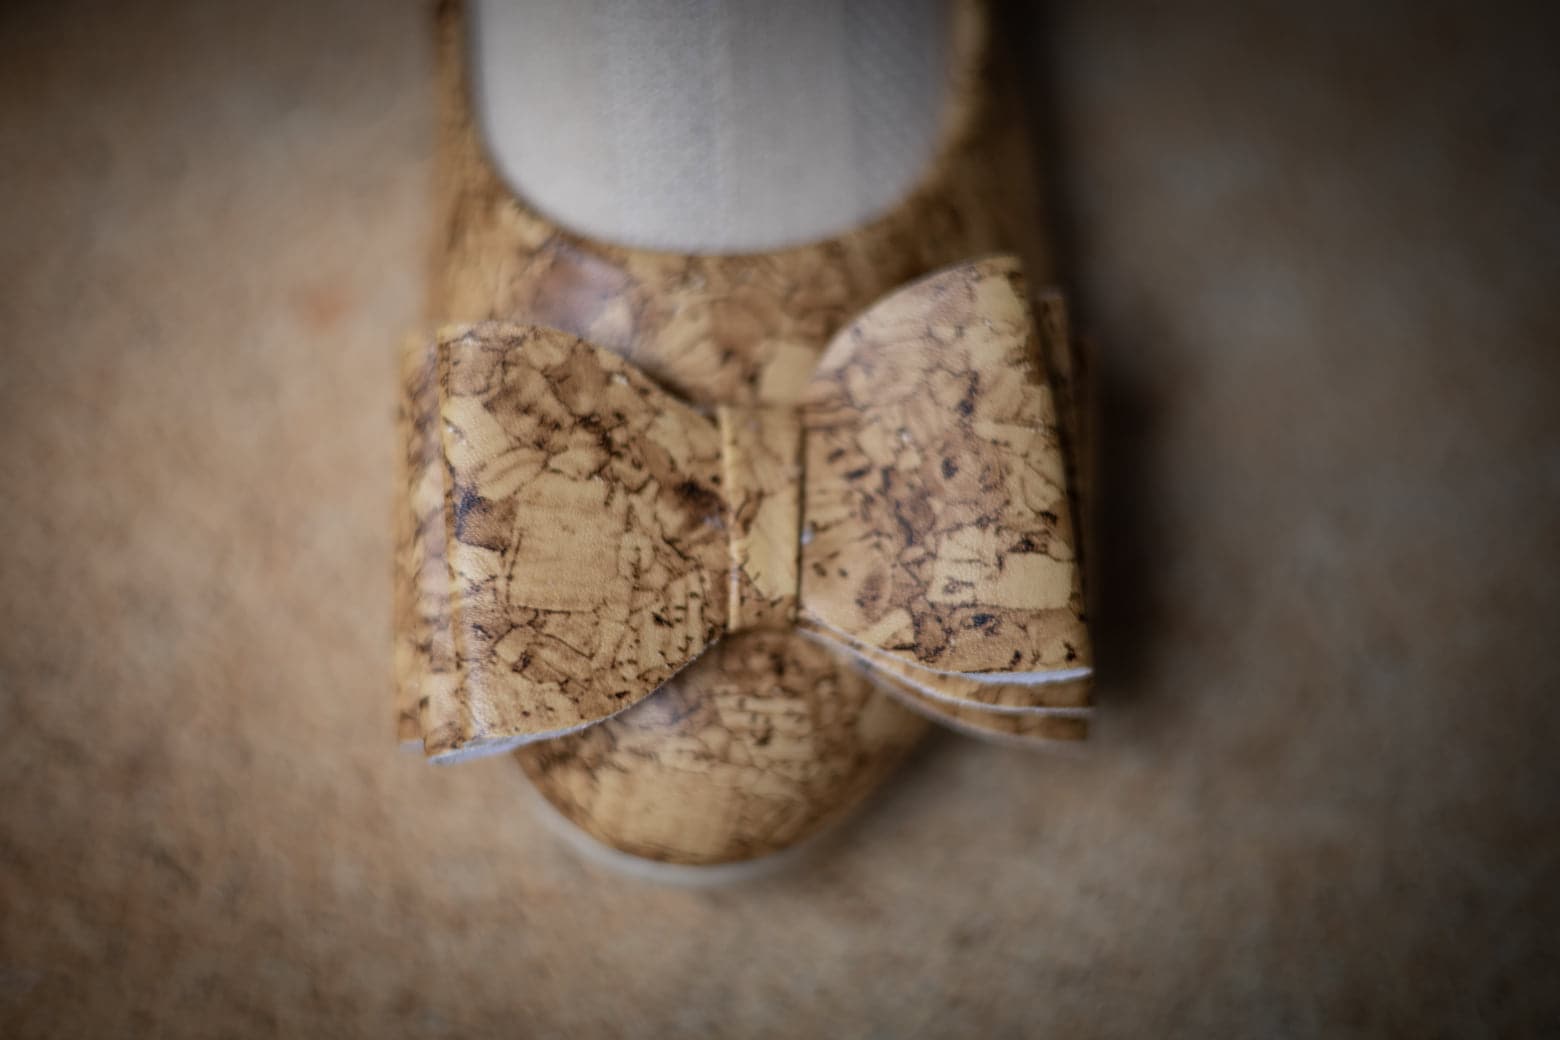 [Best Cork Ever] Bow Shoes